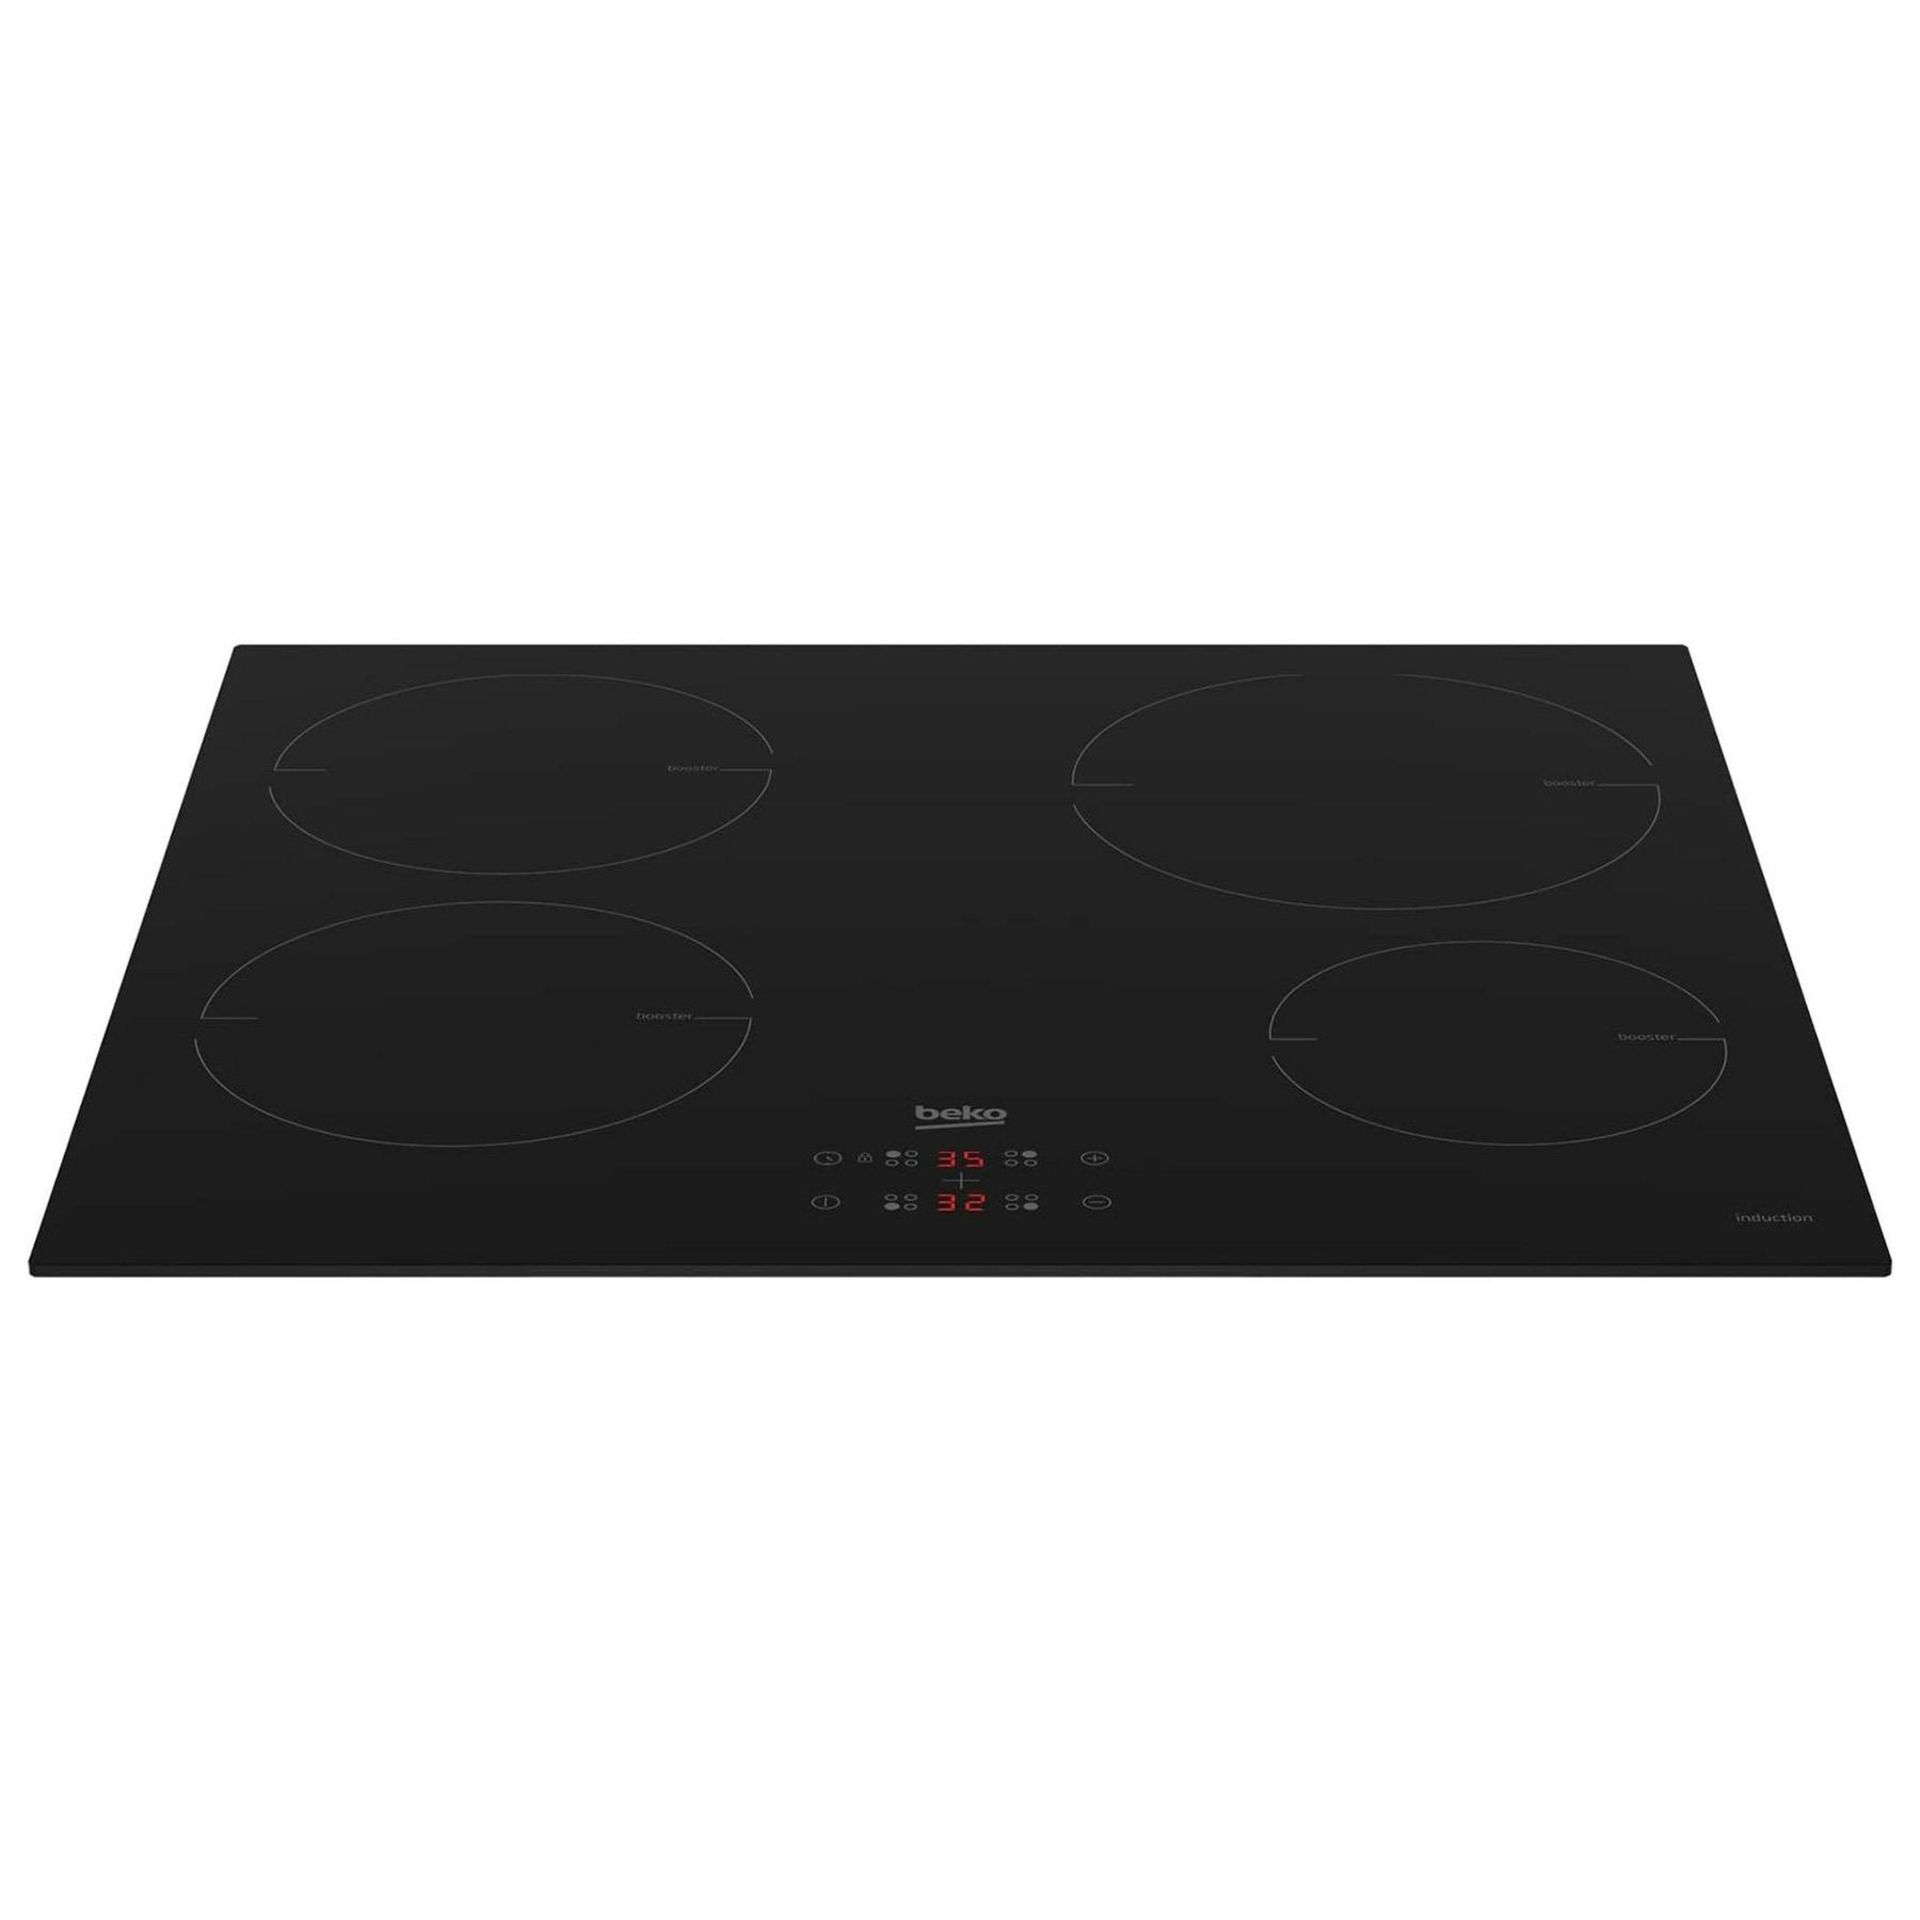 Beko 4 Zone Induction Hob in Black Touch Control - ER44 *Design may vary